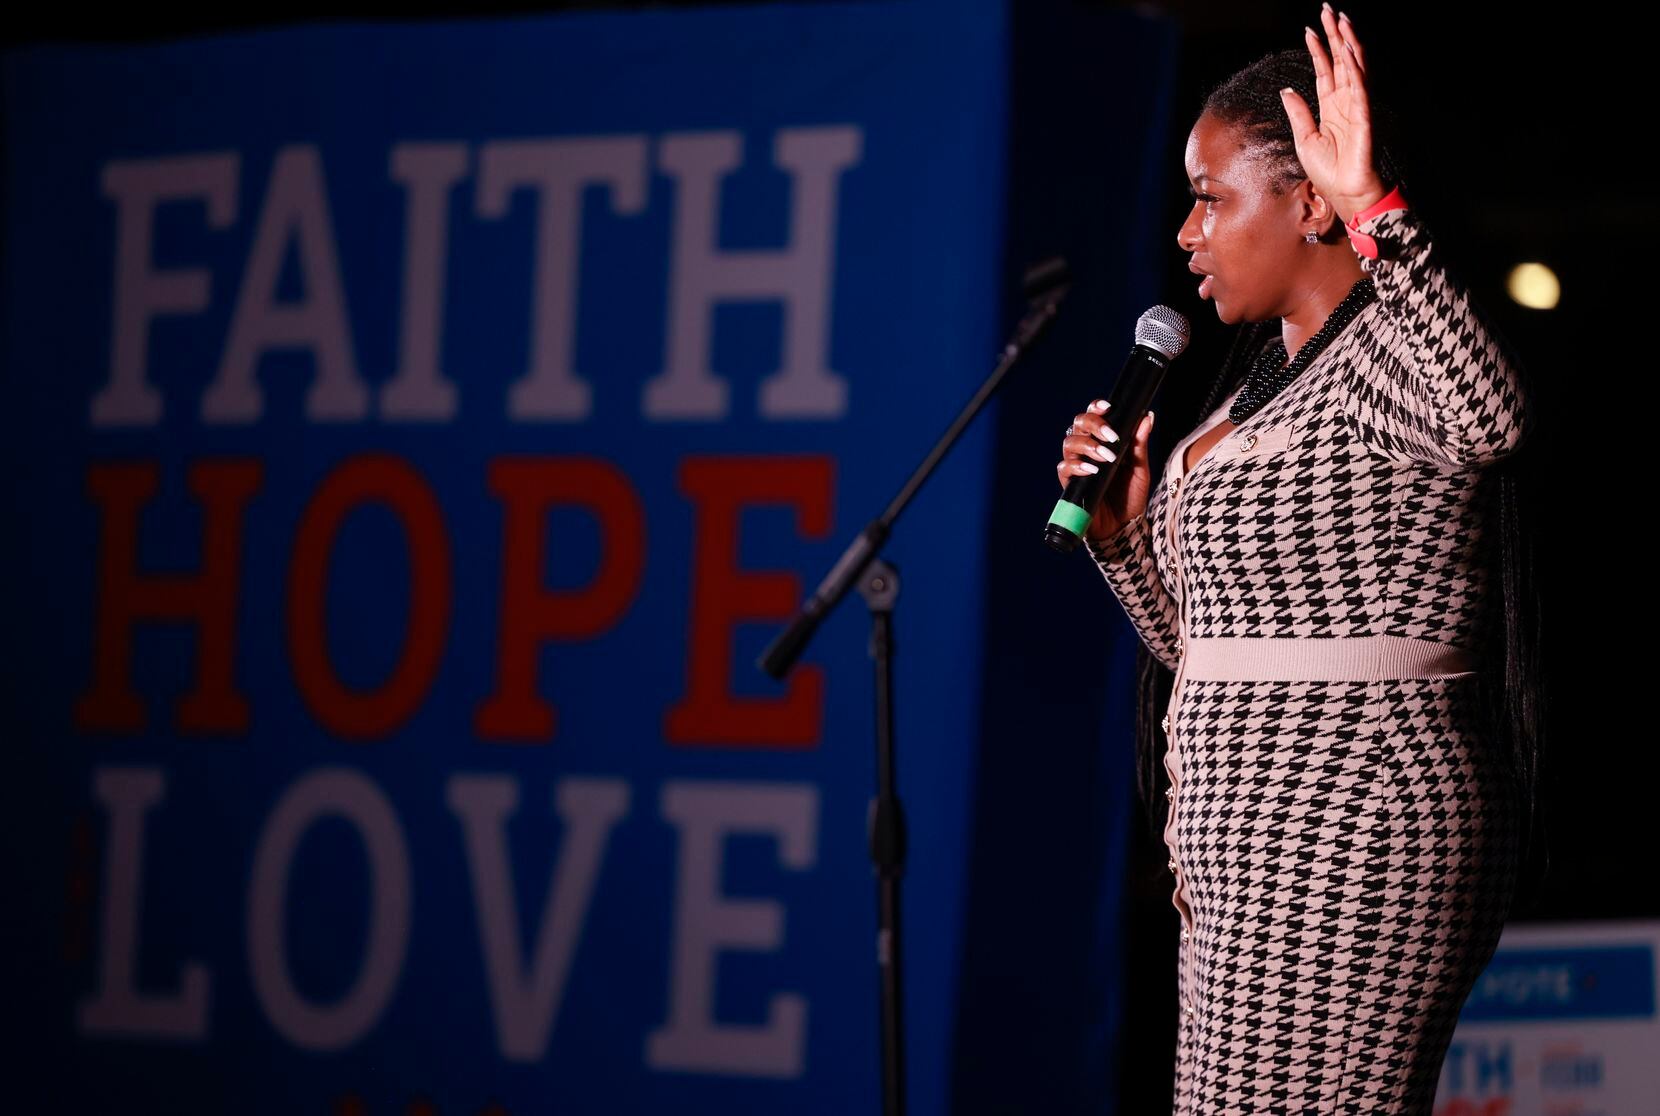 Rep. Jasmine Crockett speaks during an event organized by Vote Common Good, an evangelical...